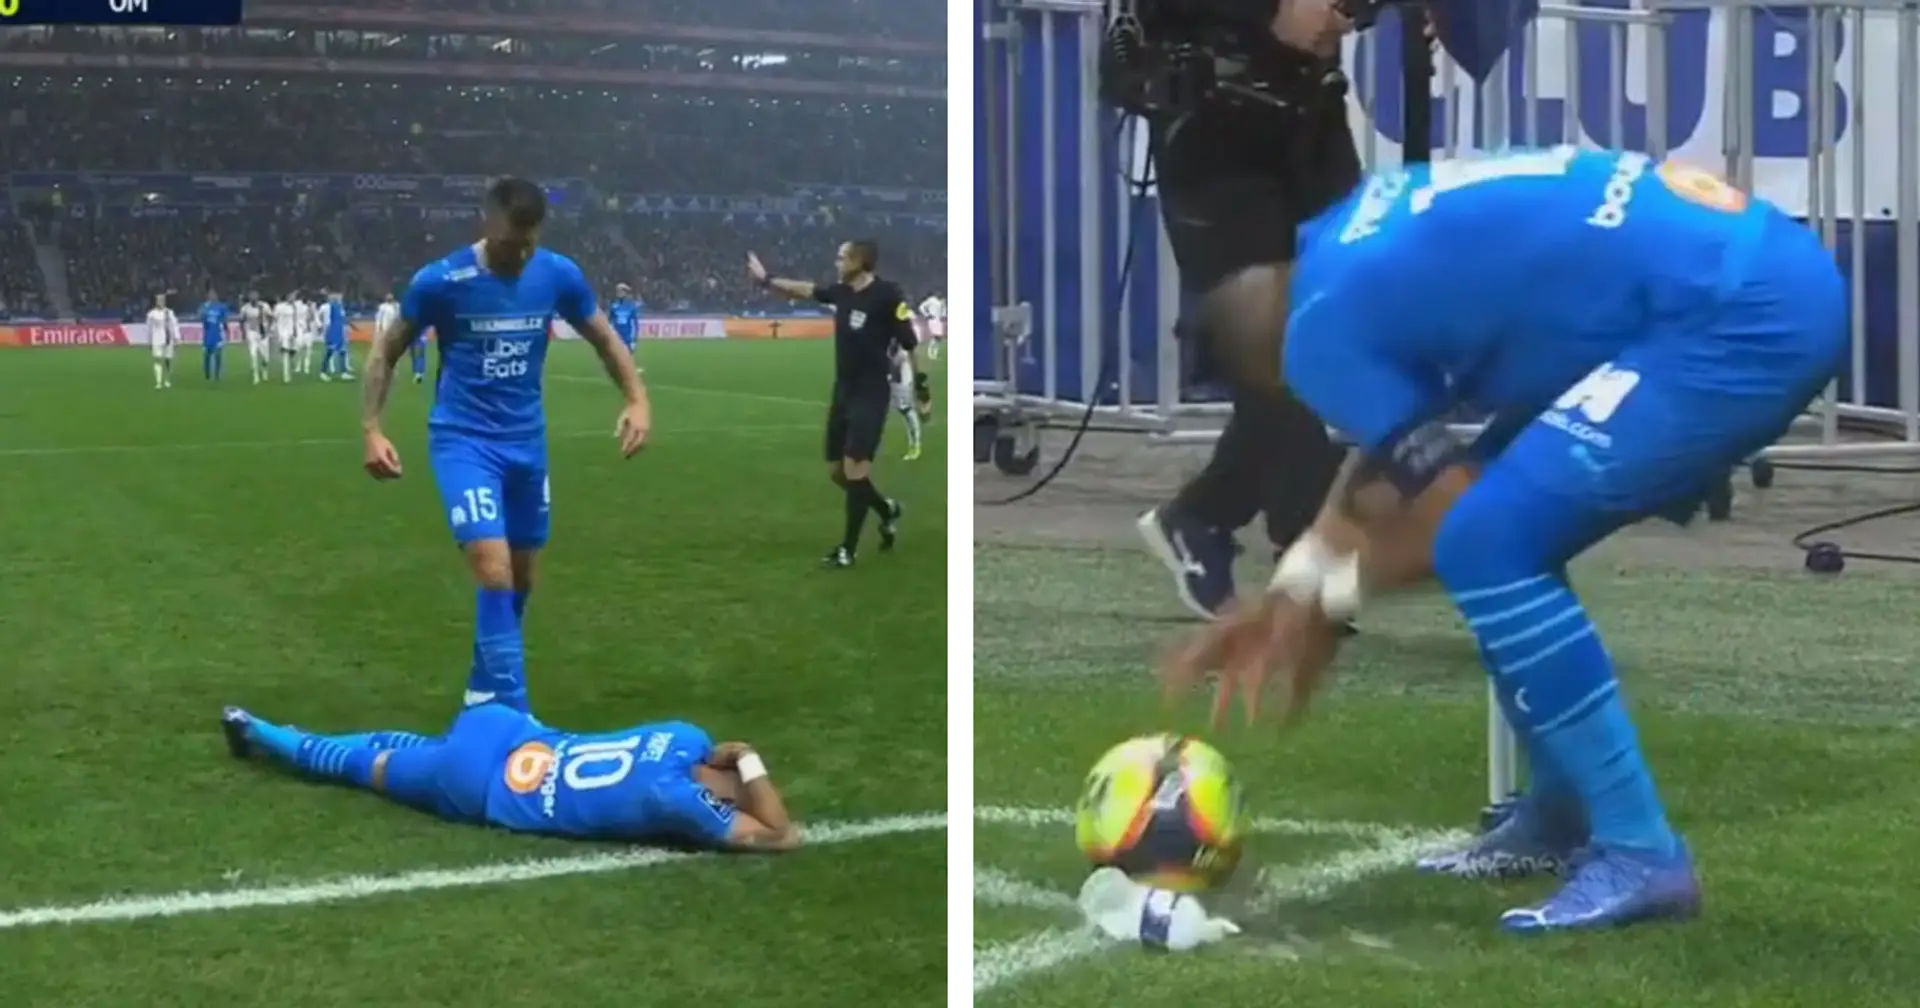 Marseille-Lyon game suspended after Dimitri Payet hit on the head by bottle